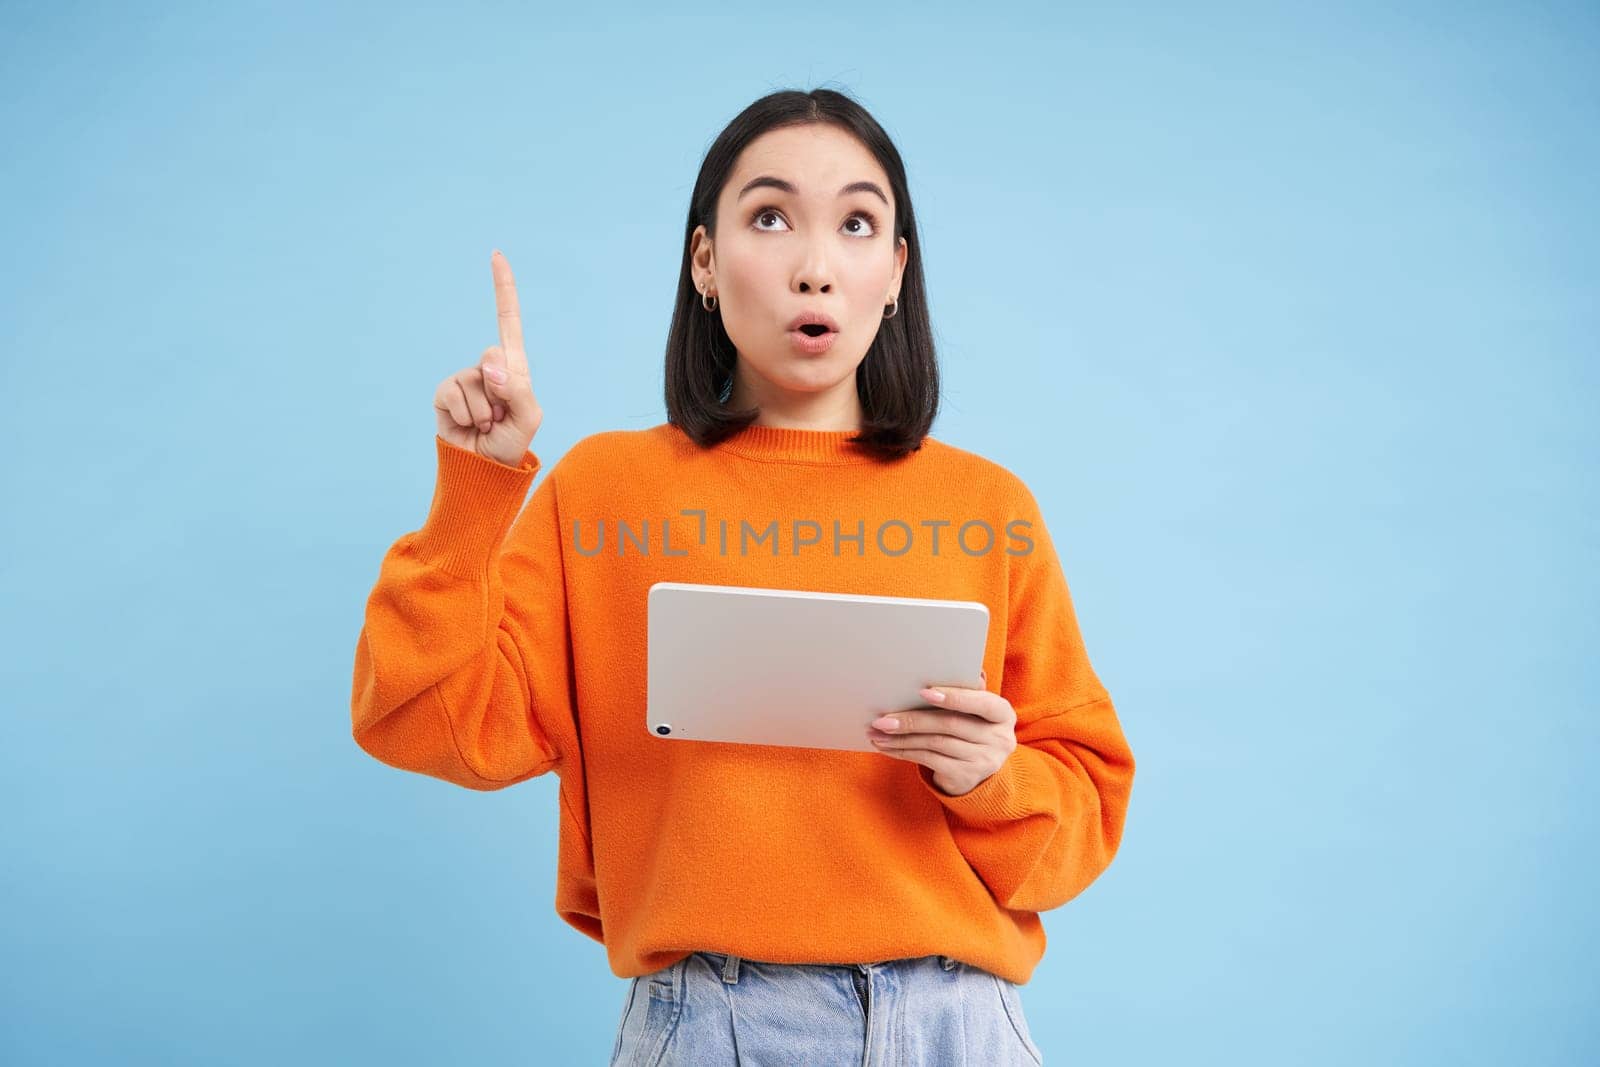 Girl with surprised face, pointing and looking up, holding digital tablet, showing awesome promo offer, standing over blue background.